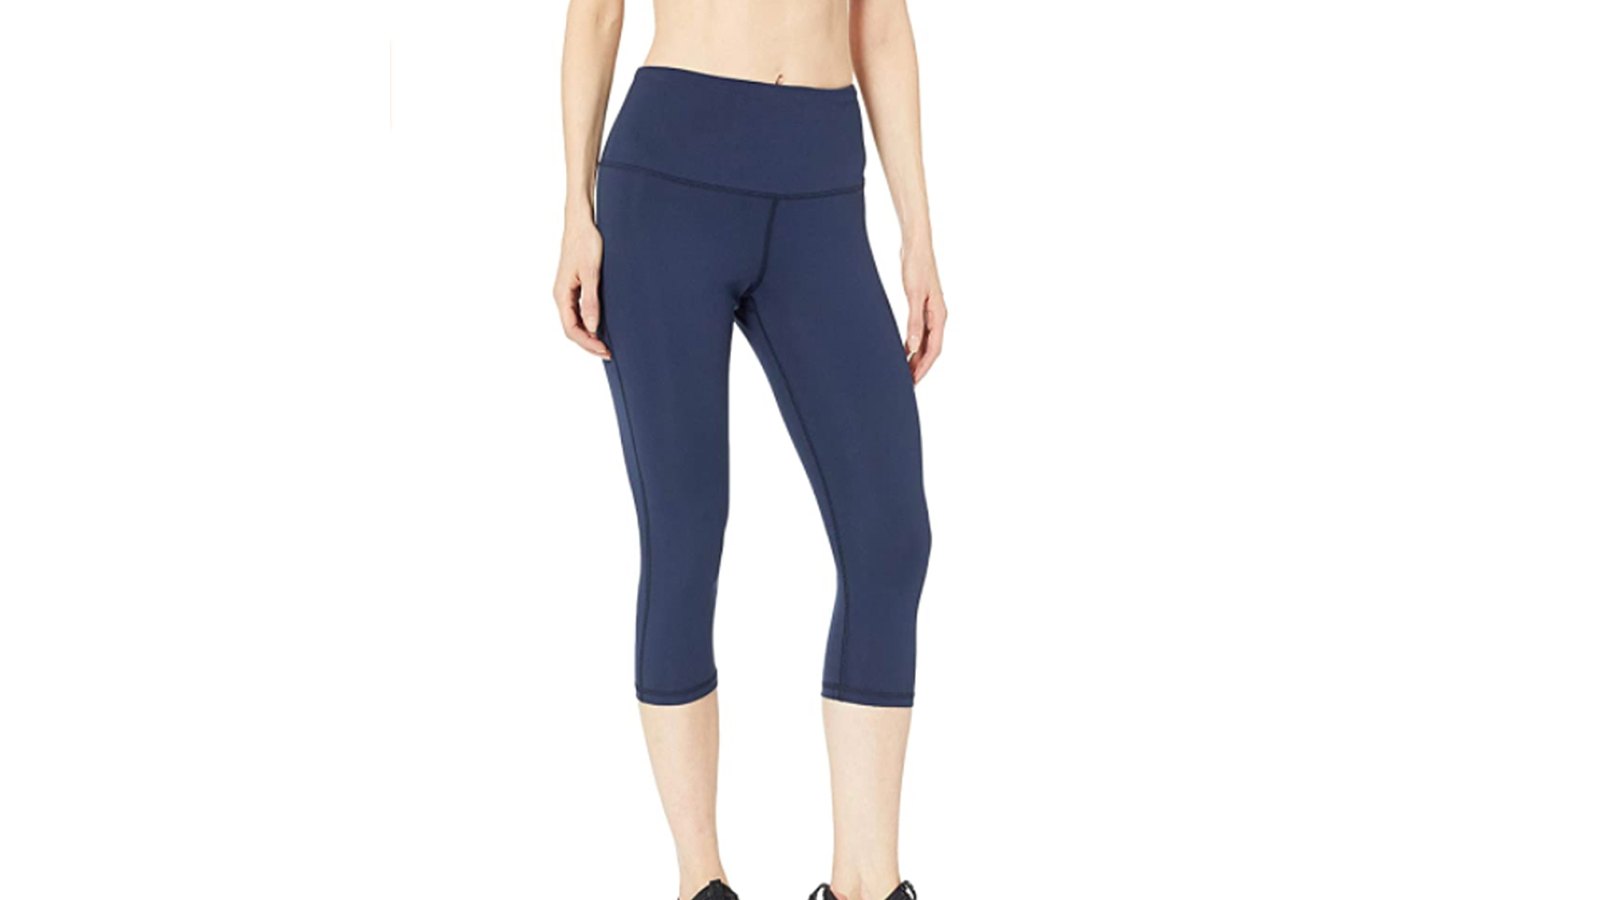 Essentials Workout Leggings Are So Affordable